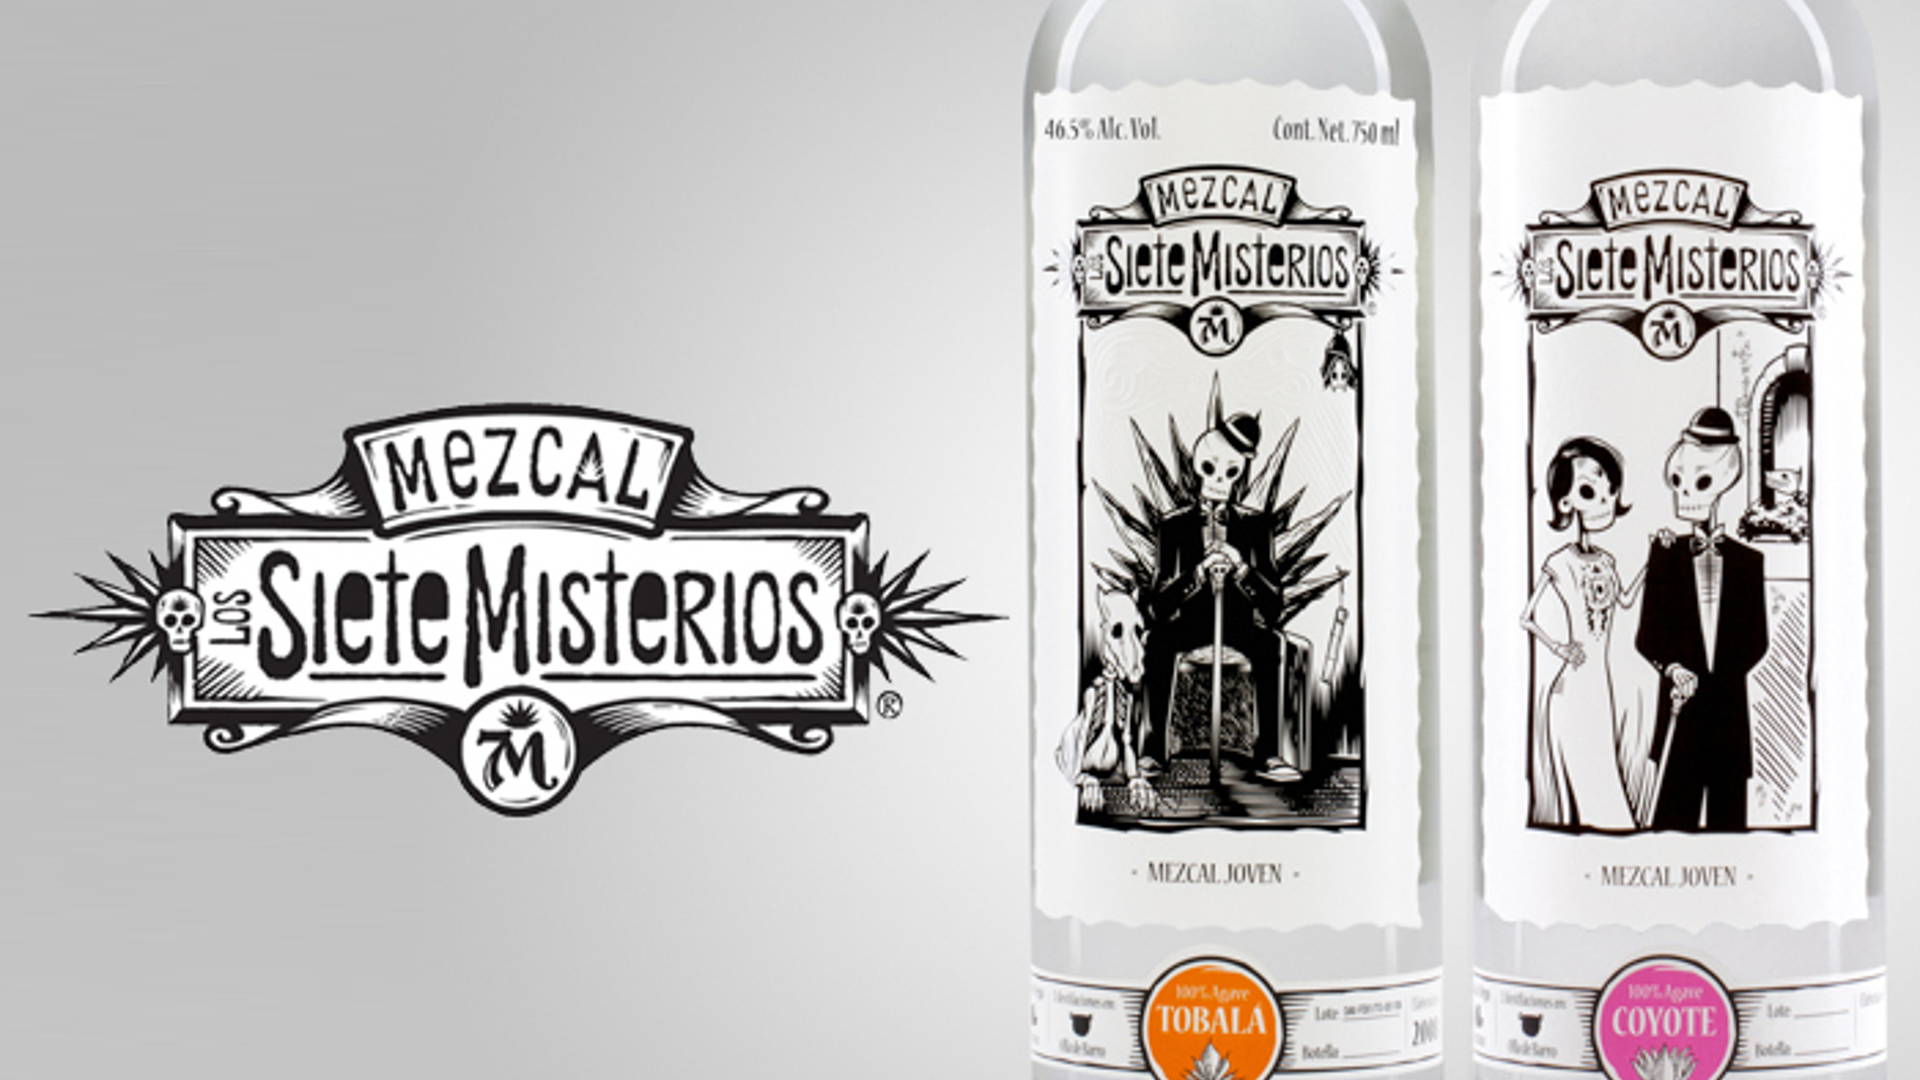 Featured image for Los Siete Misterios